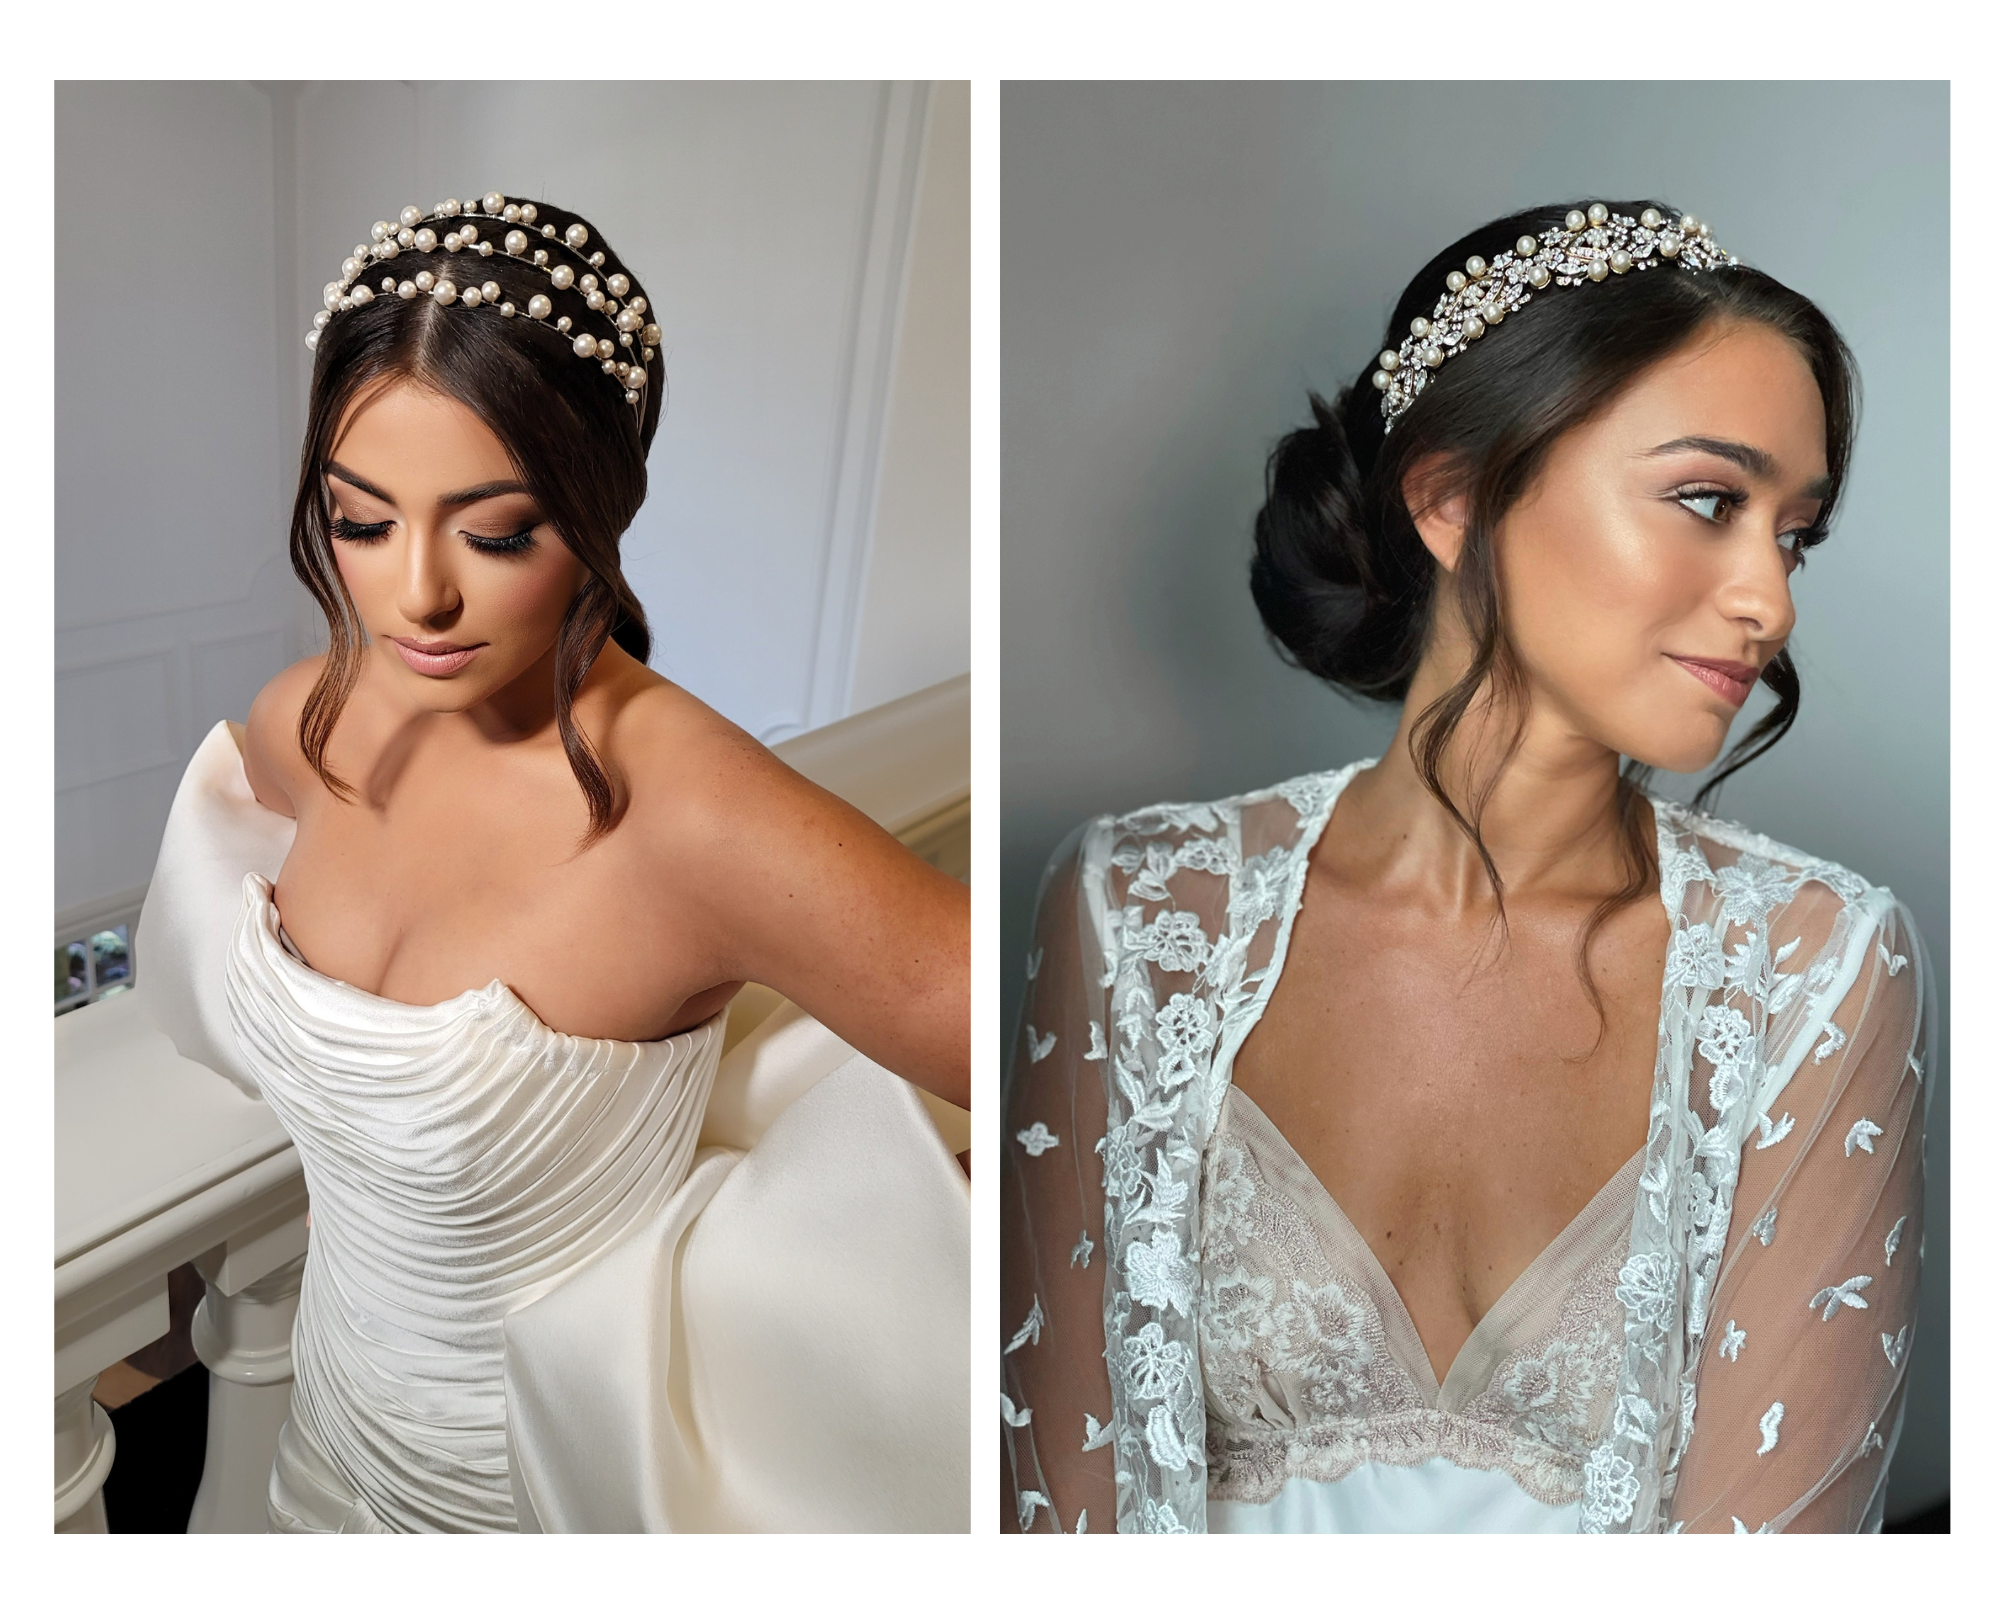 Two pictures of brides with their hair up.  Both are wearing wide pearl bridal headbands.